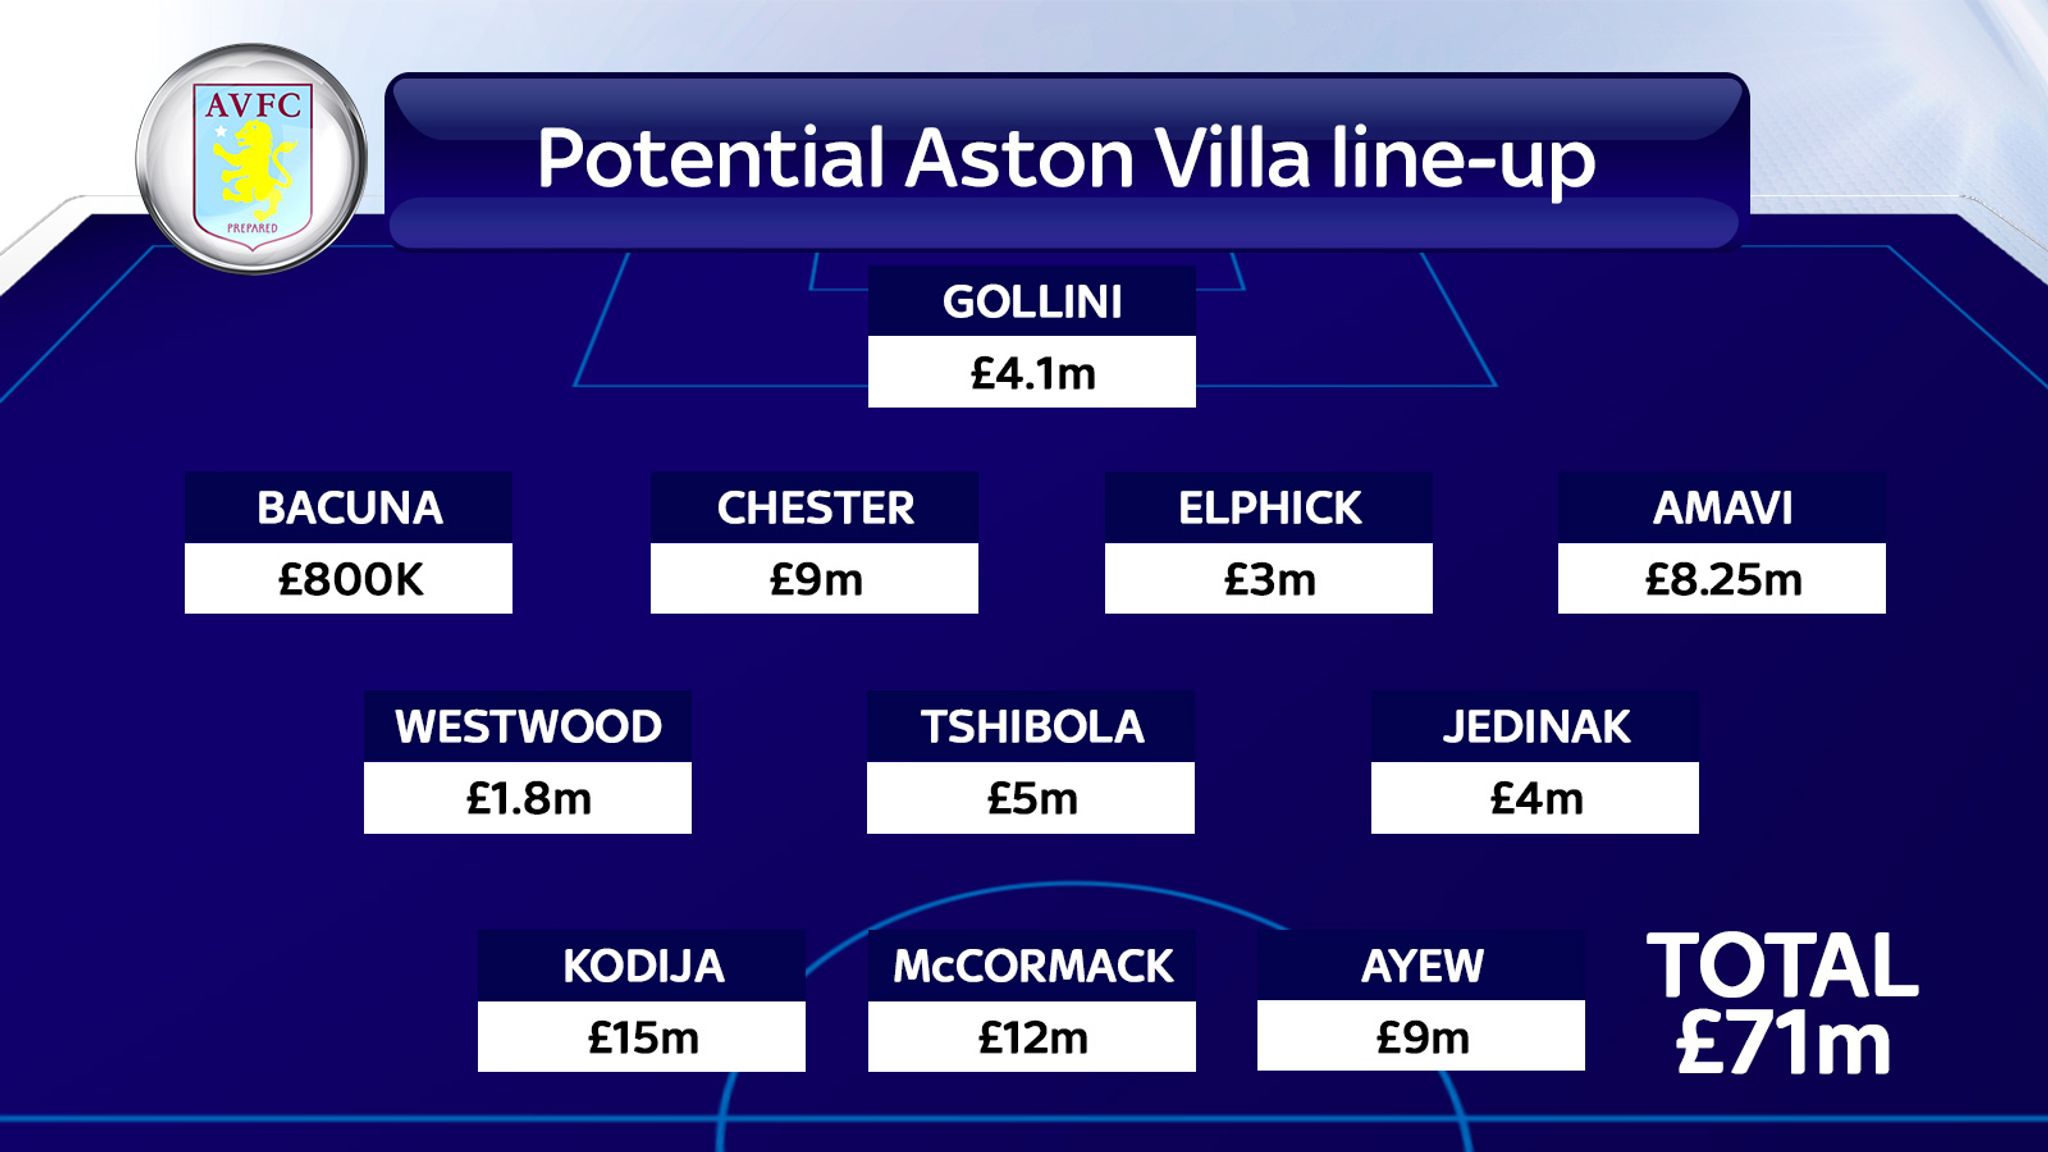 Aston Villa v Newcastle Combined lineups cost in excess of £150m